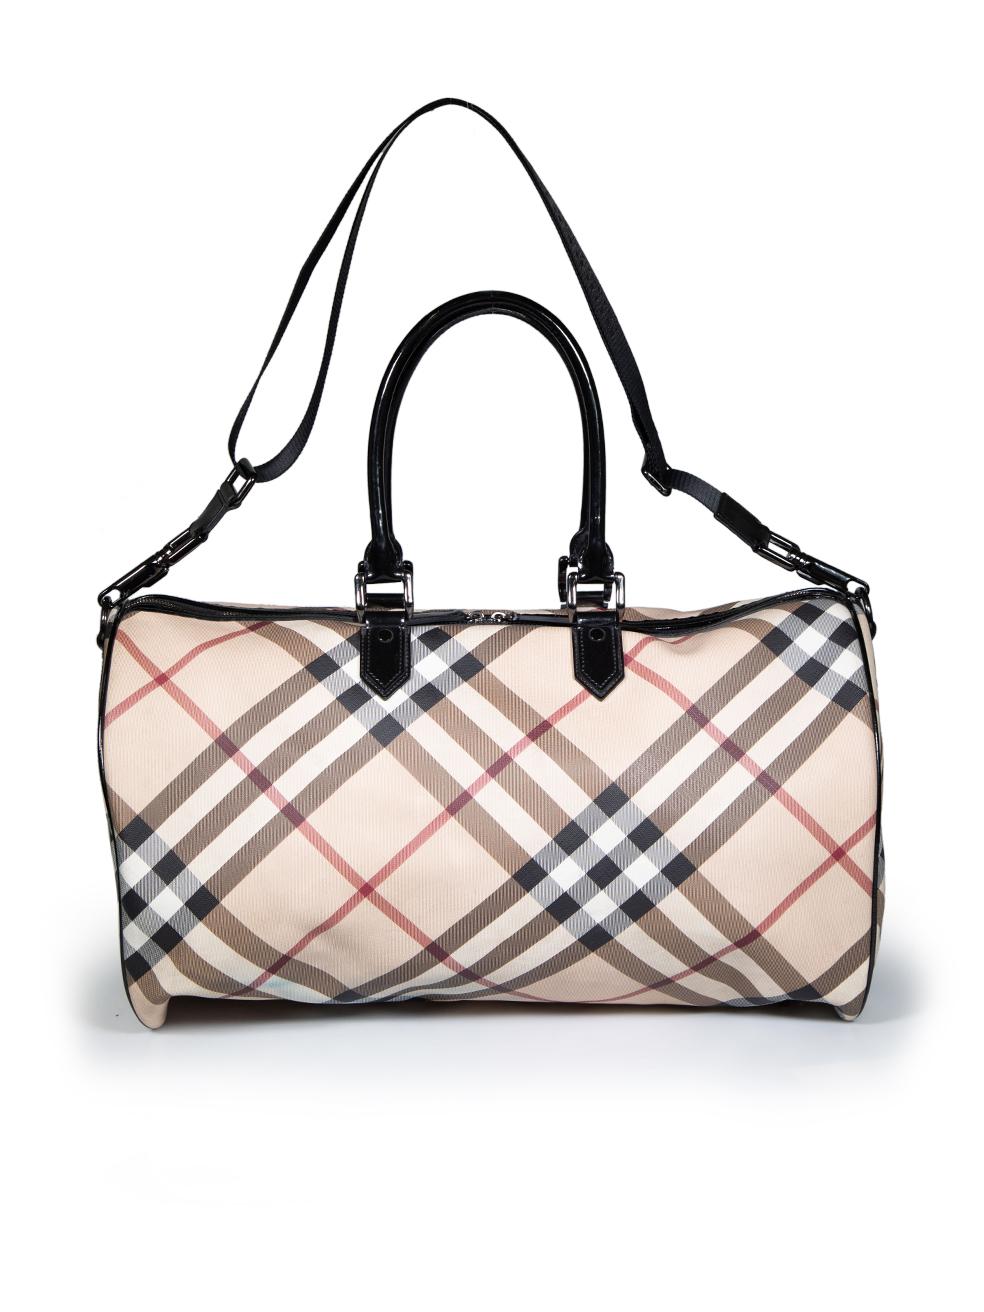 Burberry Beige Nova Check Duffle Bag In Good Condition For Sale In London, GB